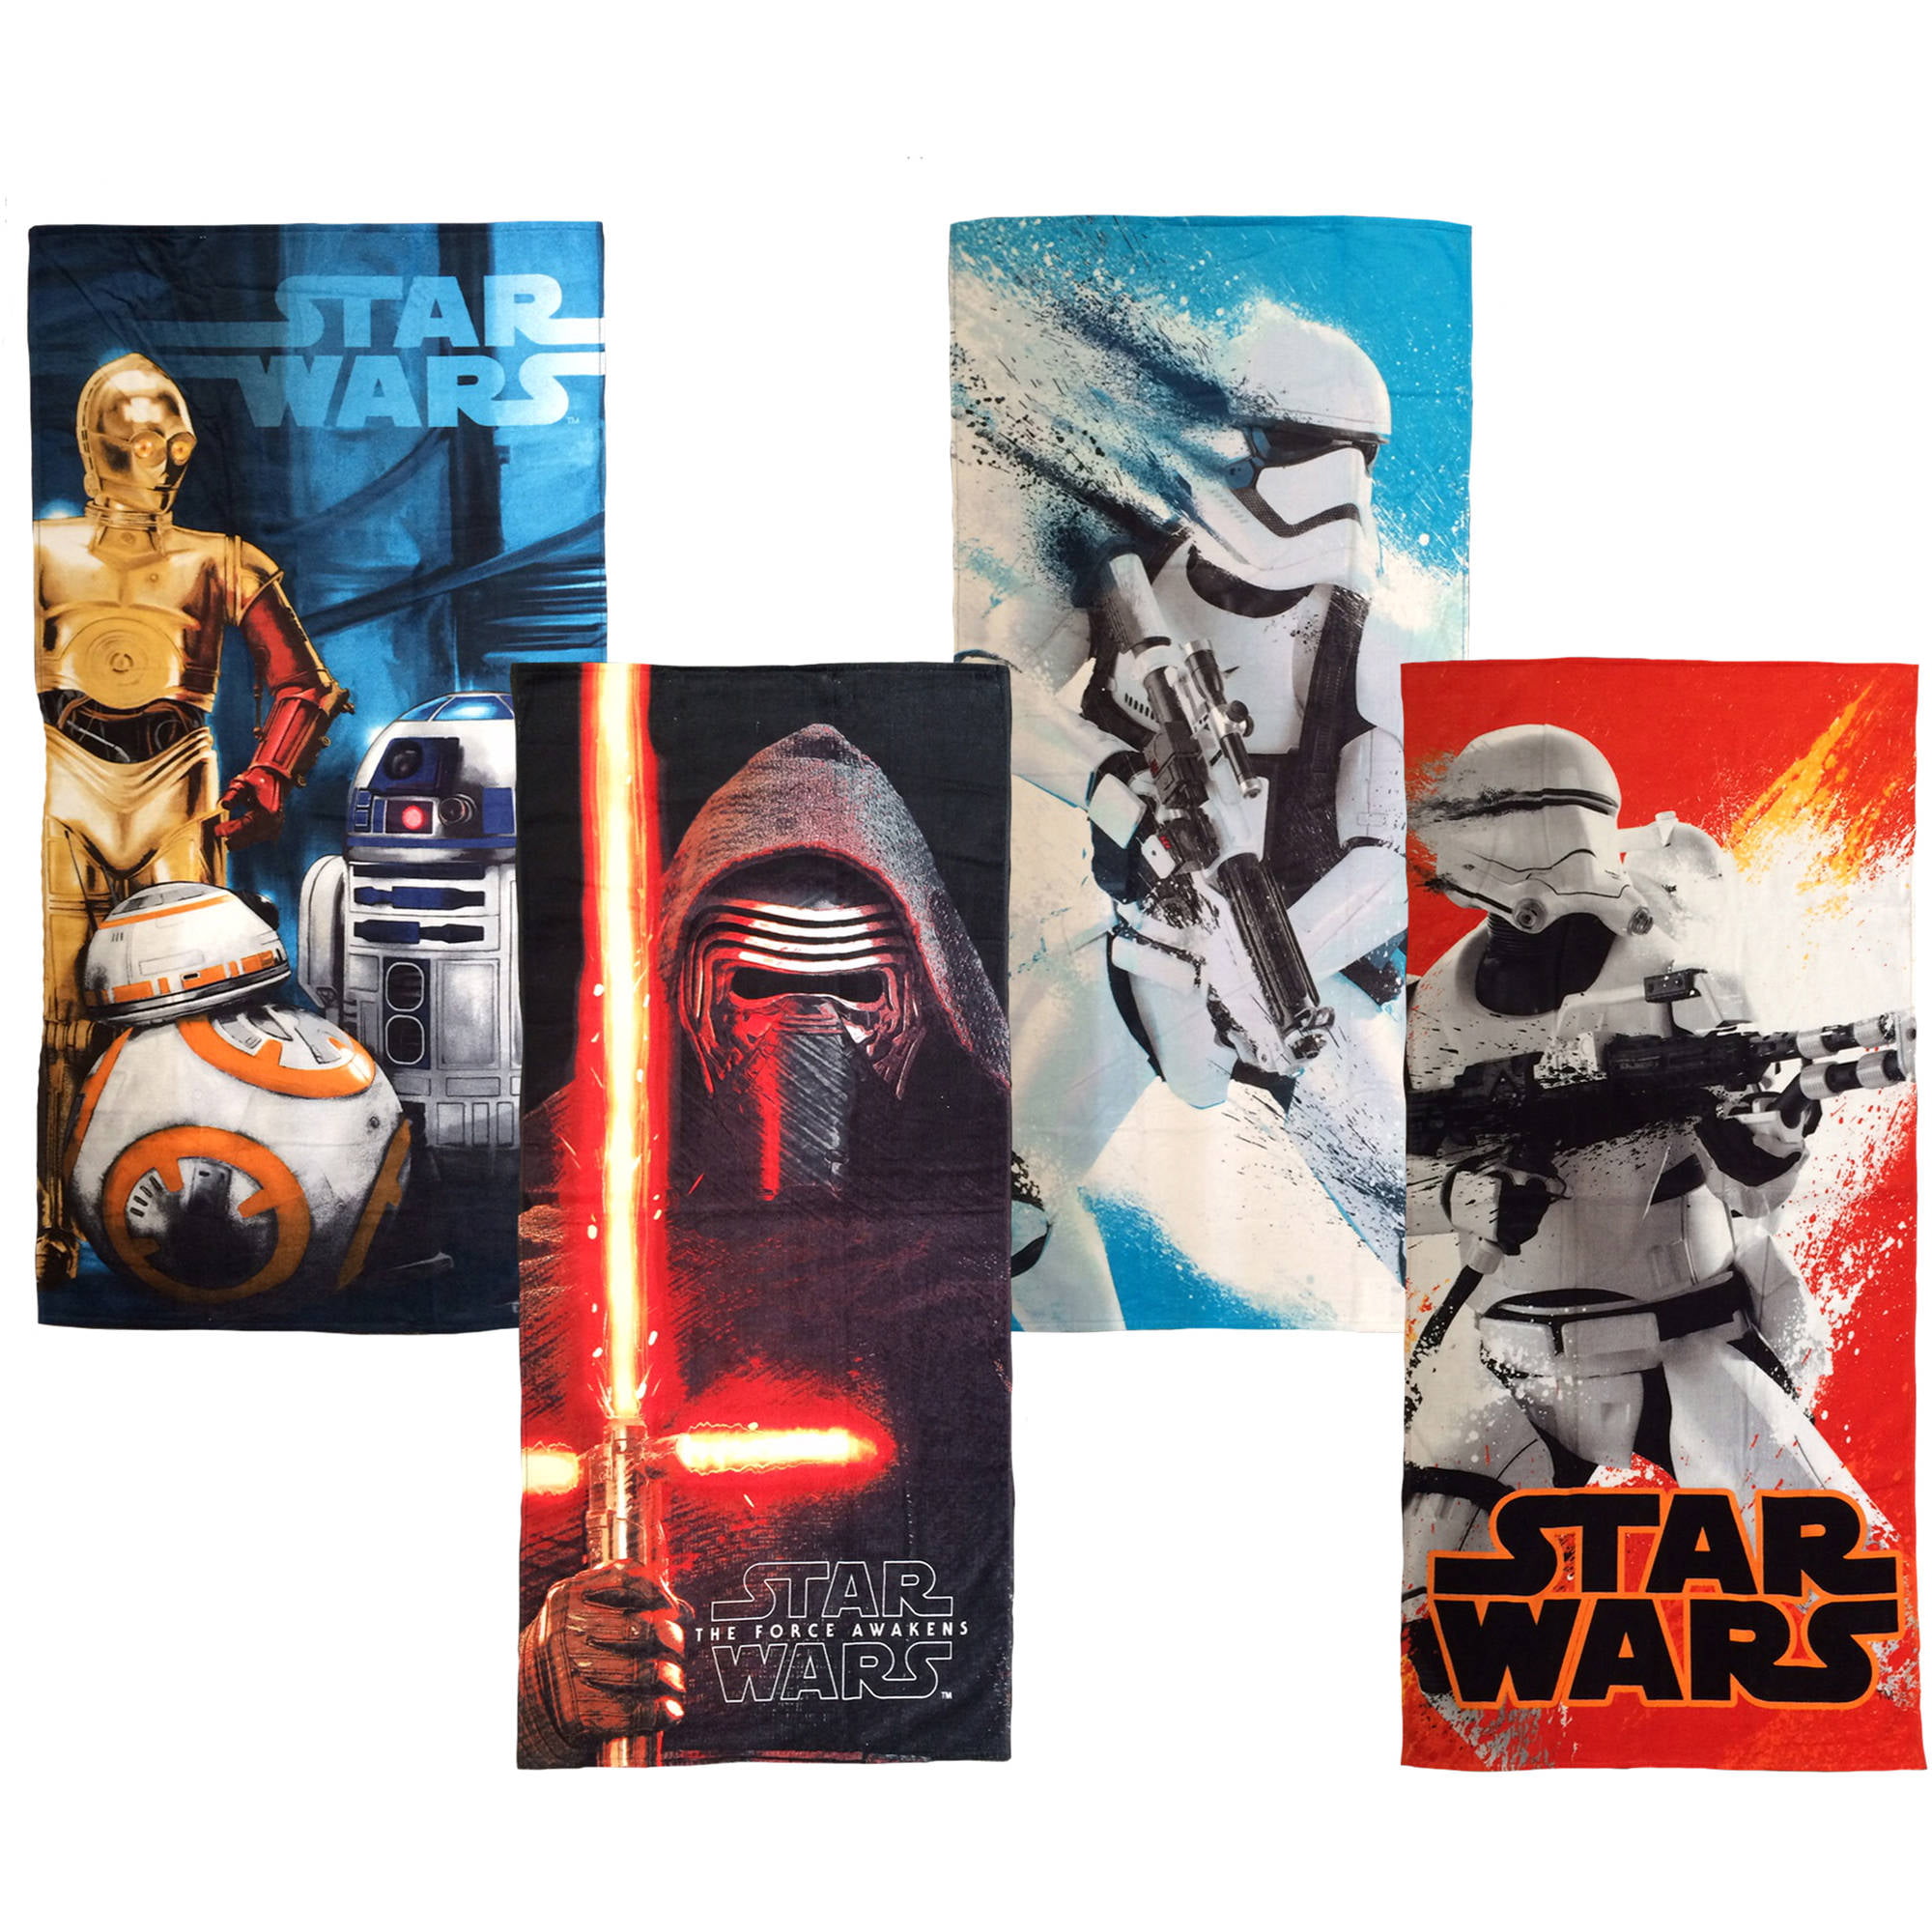 Star Wars Episode VII Flame Trooper Beach Towel measures 28 x 58 inches 